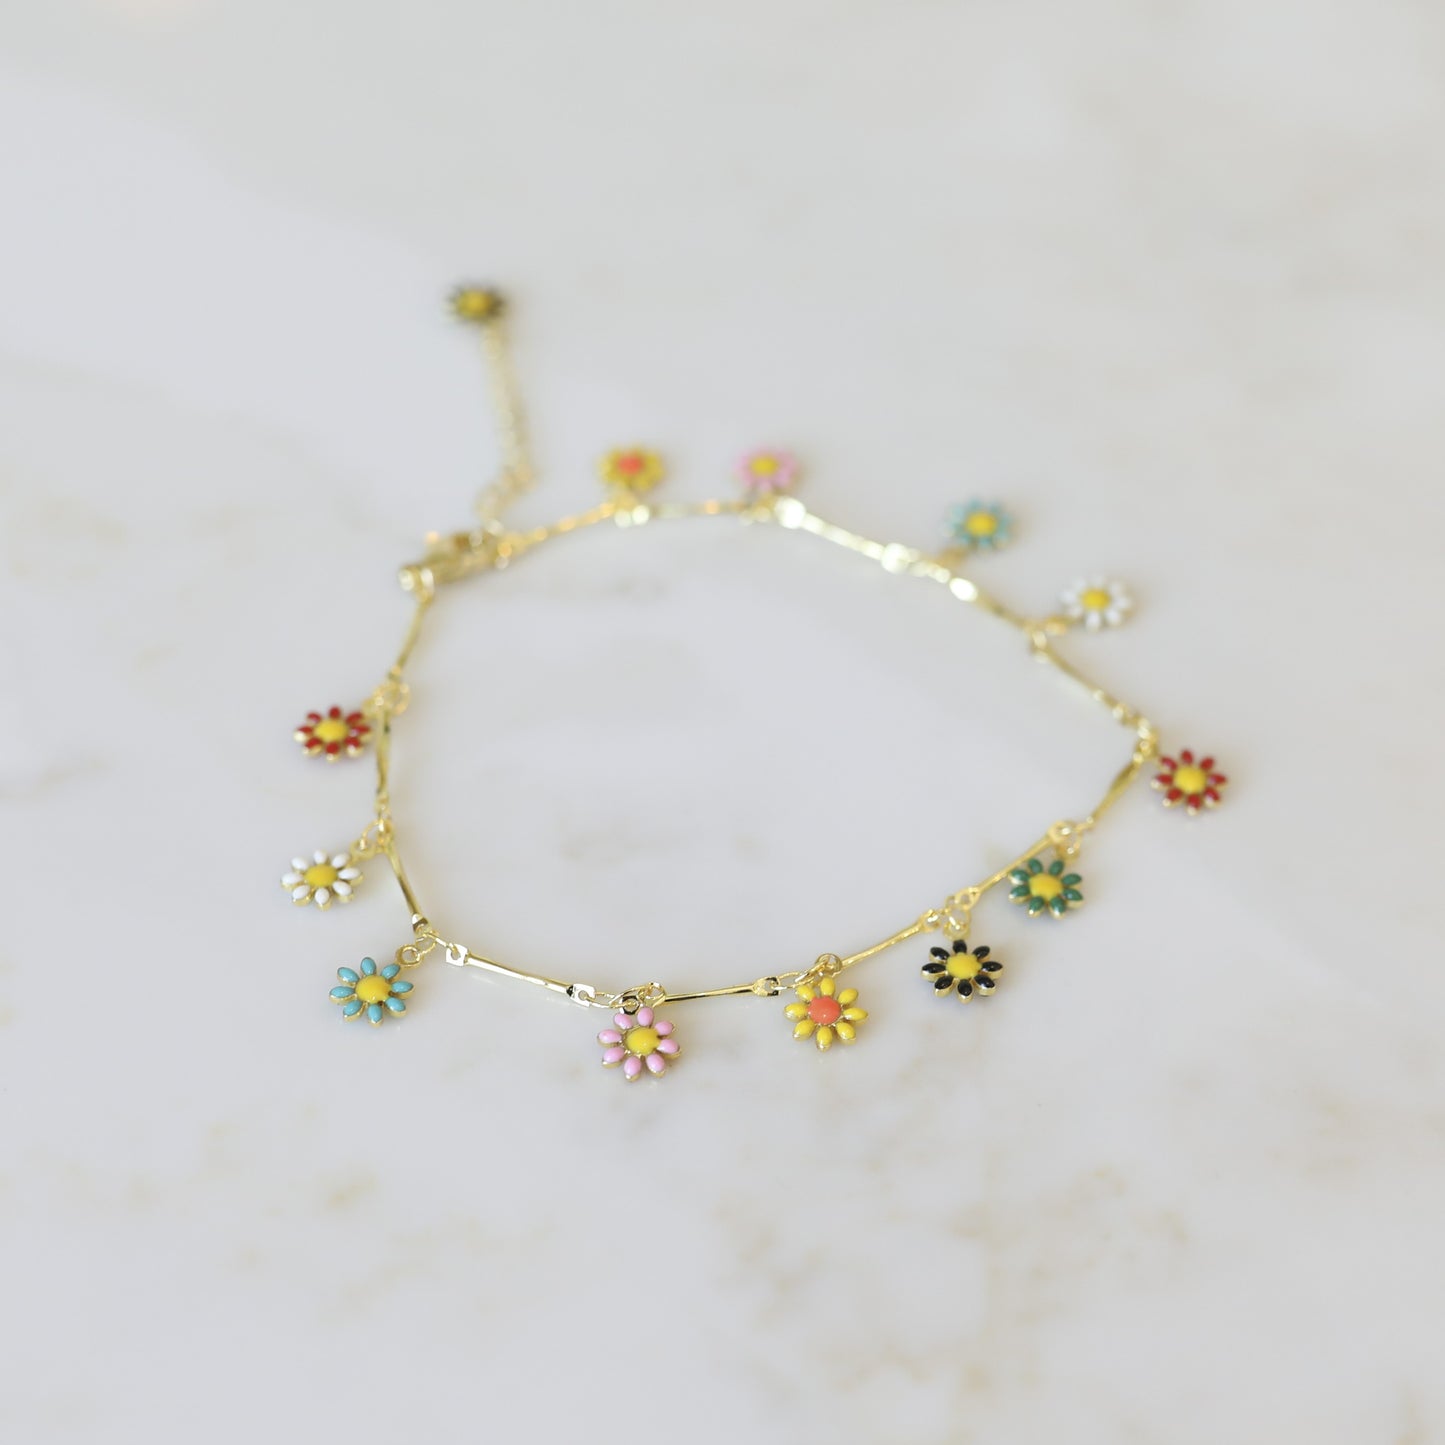 Daisy Anklet Multicolored Enamel Daisy Charms